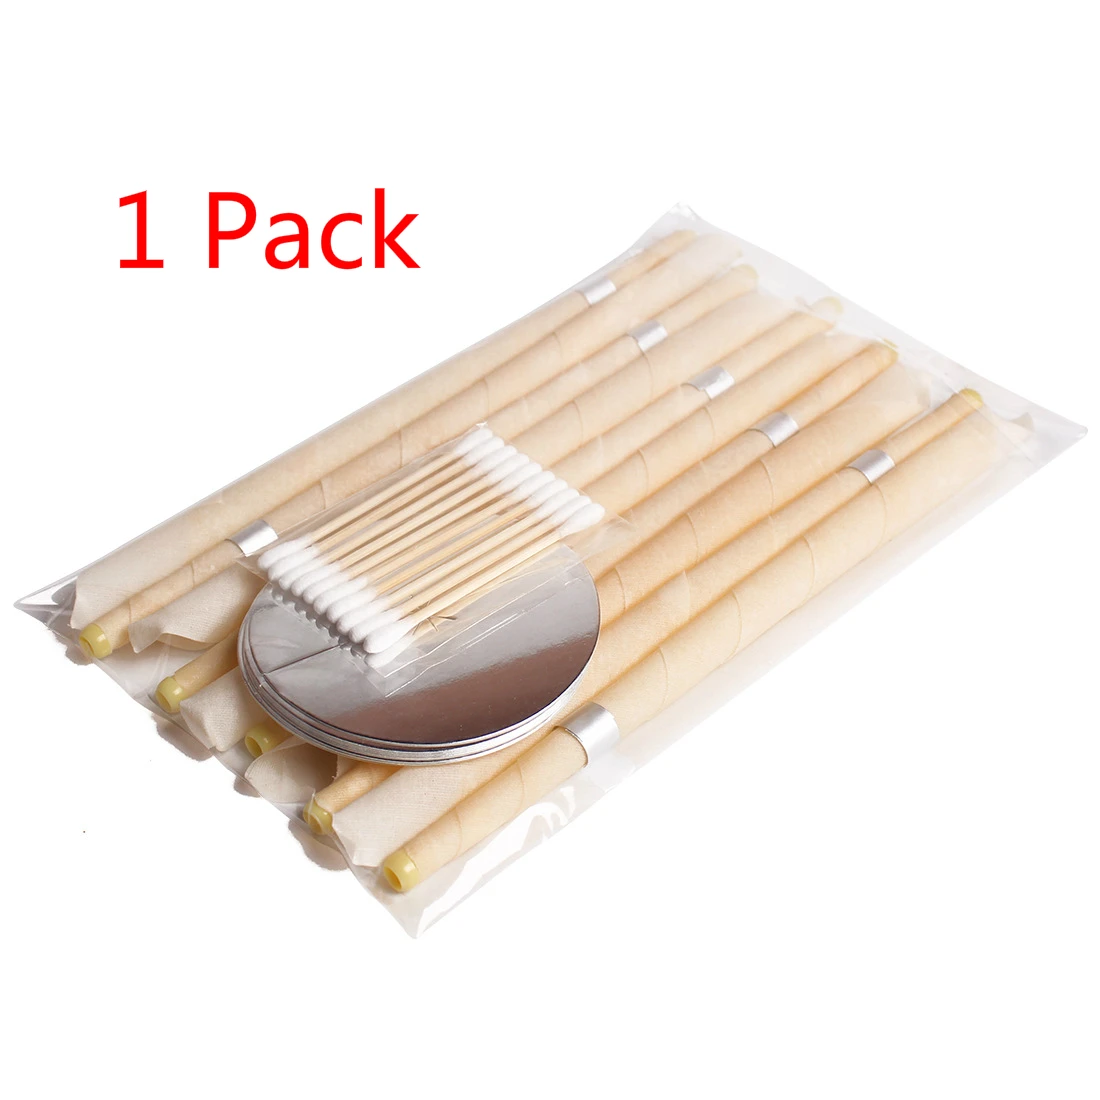 Ear Candles Ear Wax Clean Removal Natural Beeswax Propolis Indiana Therapy Fragrance Candling Cone Candle Relaxation Tools